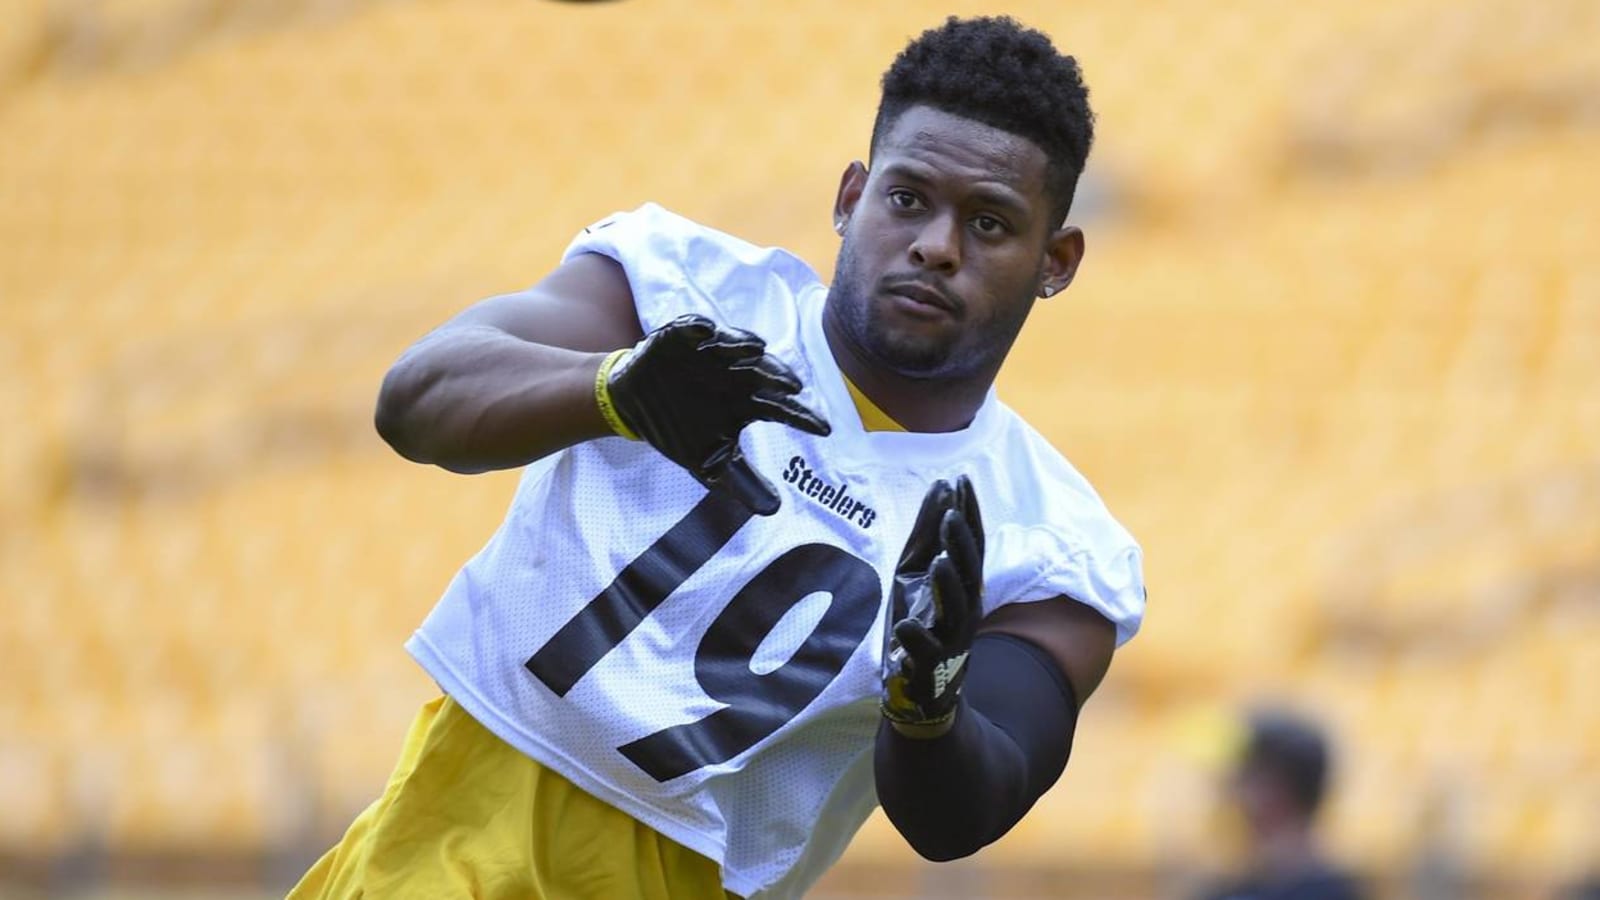 Steelers great Rod Woodson thinks JuJu Smith-Schuster should be traded